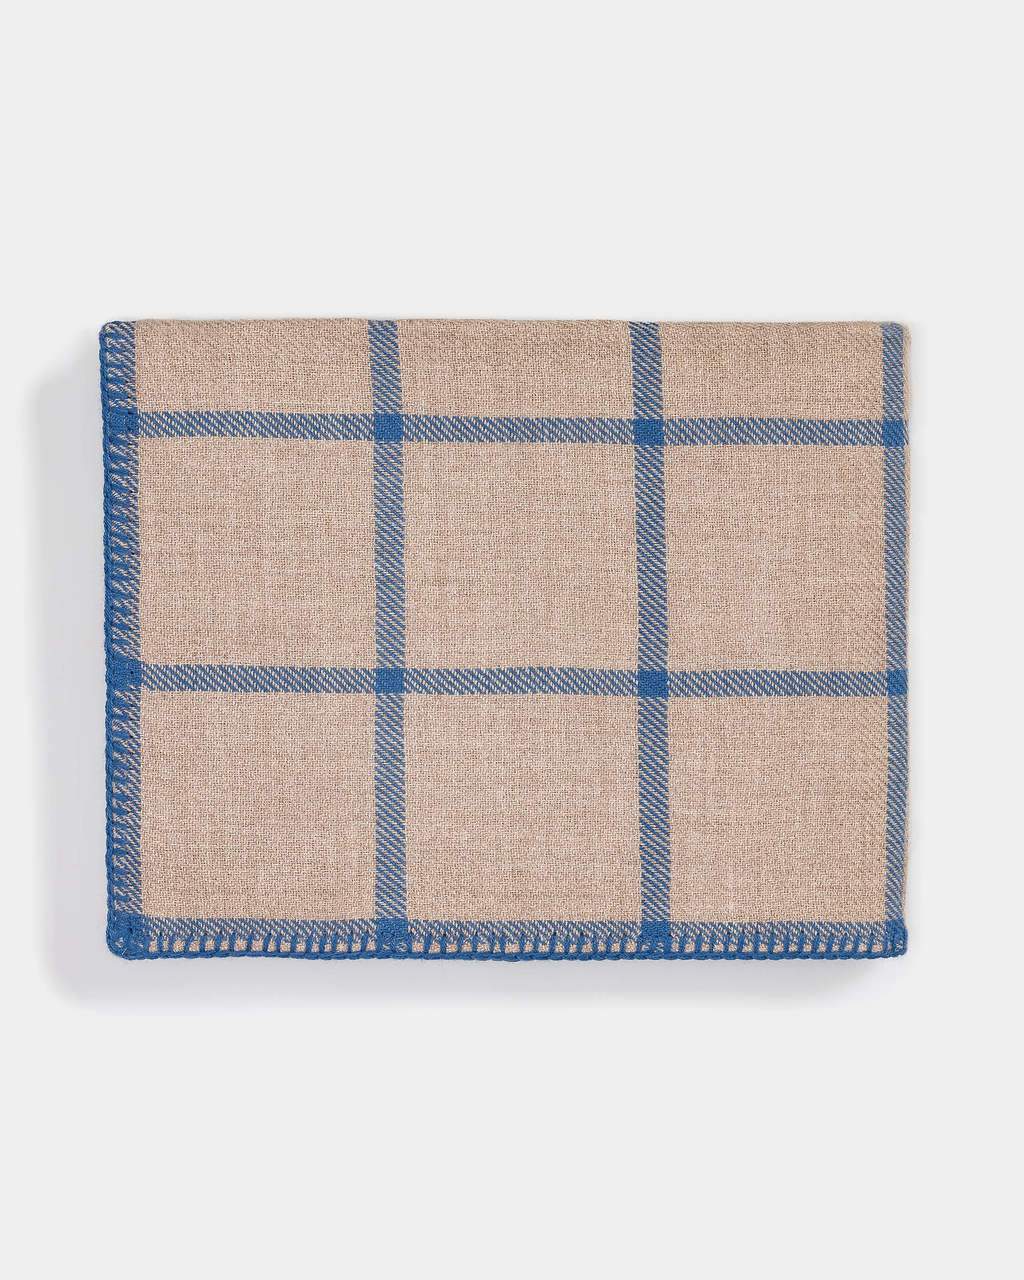 Graydon Alpaca Throw in Light Taupe and Blue by Alicia Adams